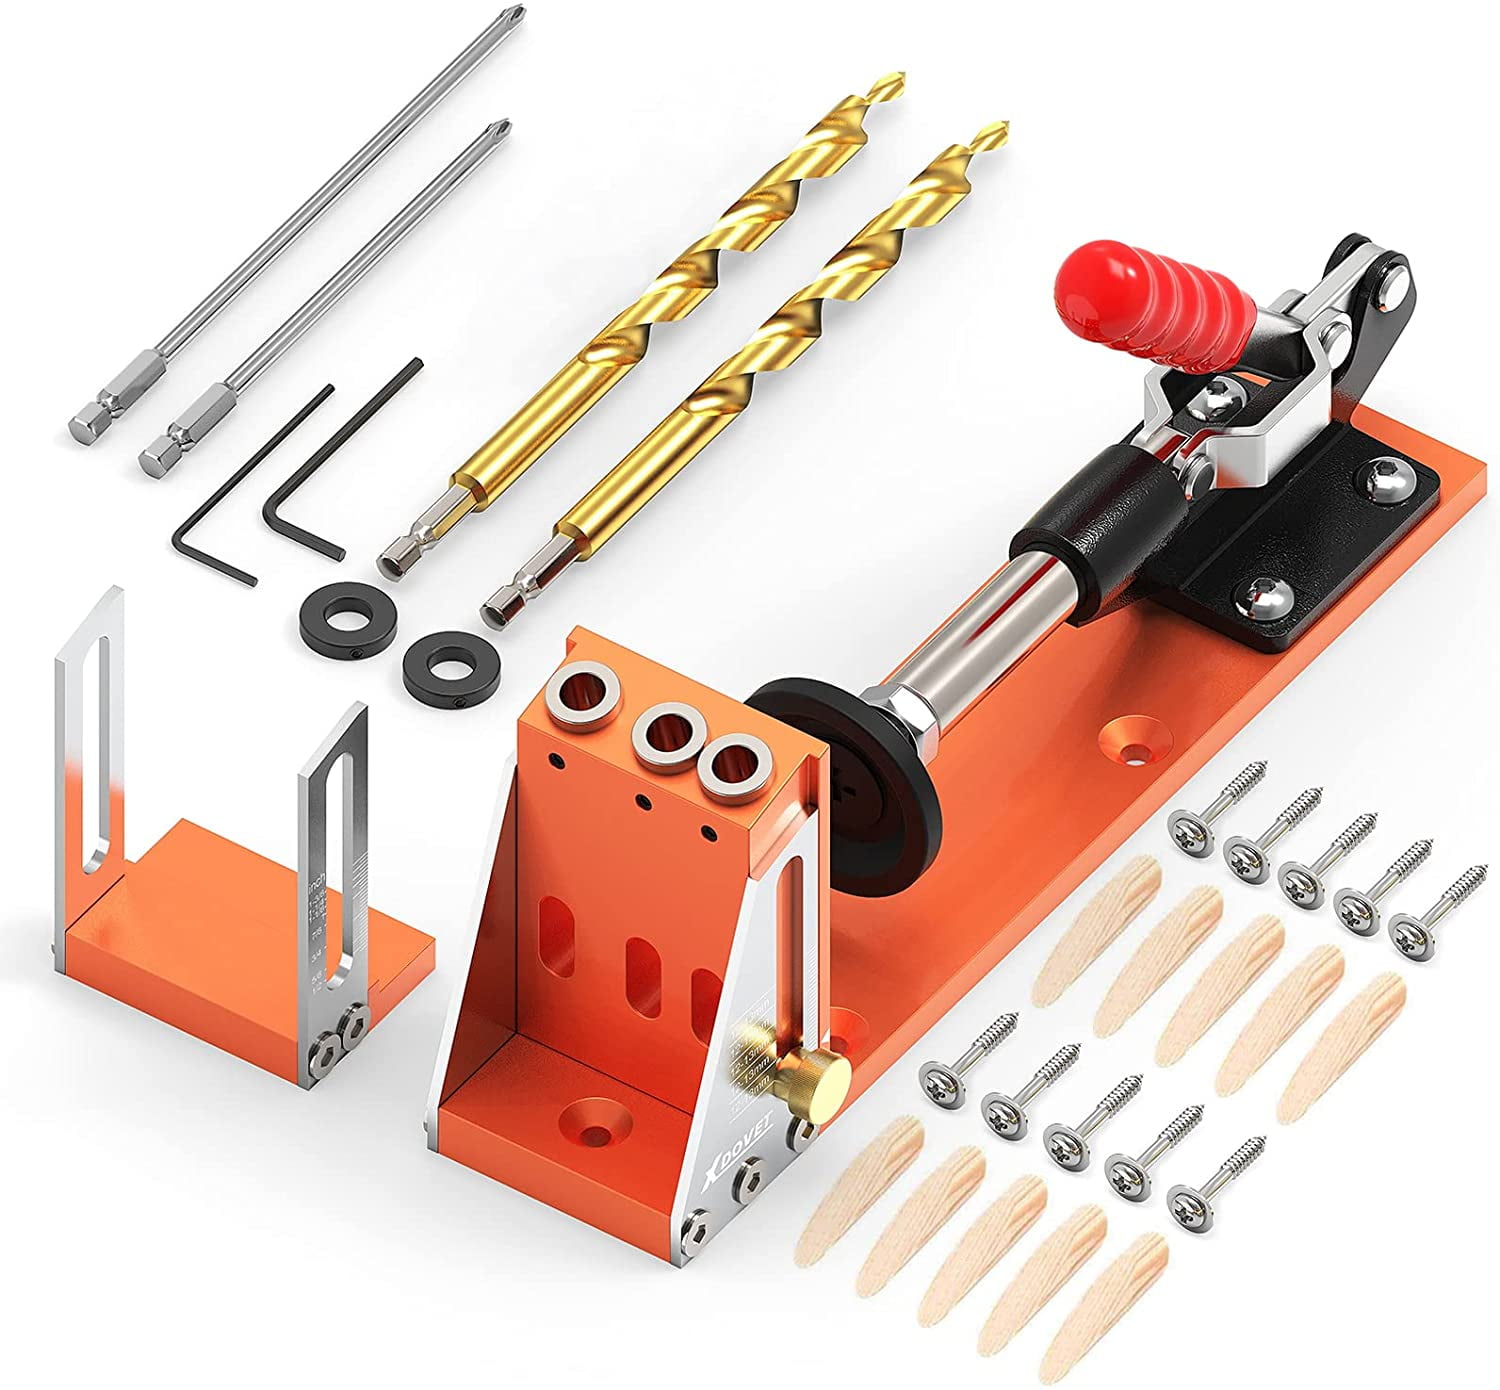 MADE IN USA PRO-TOOL CONTRACTOR SHOP WOODWORK MINI JIG KIT POCKET HOLE GUIDE 